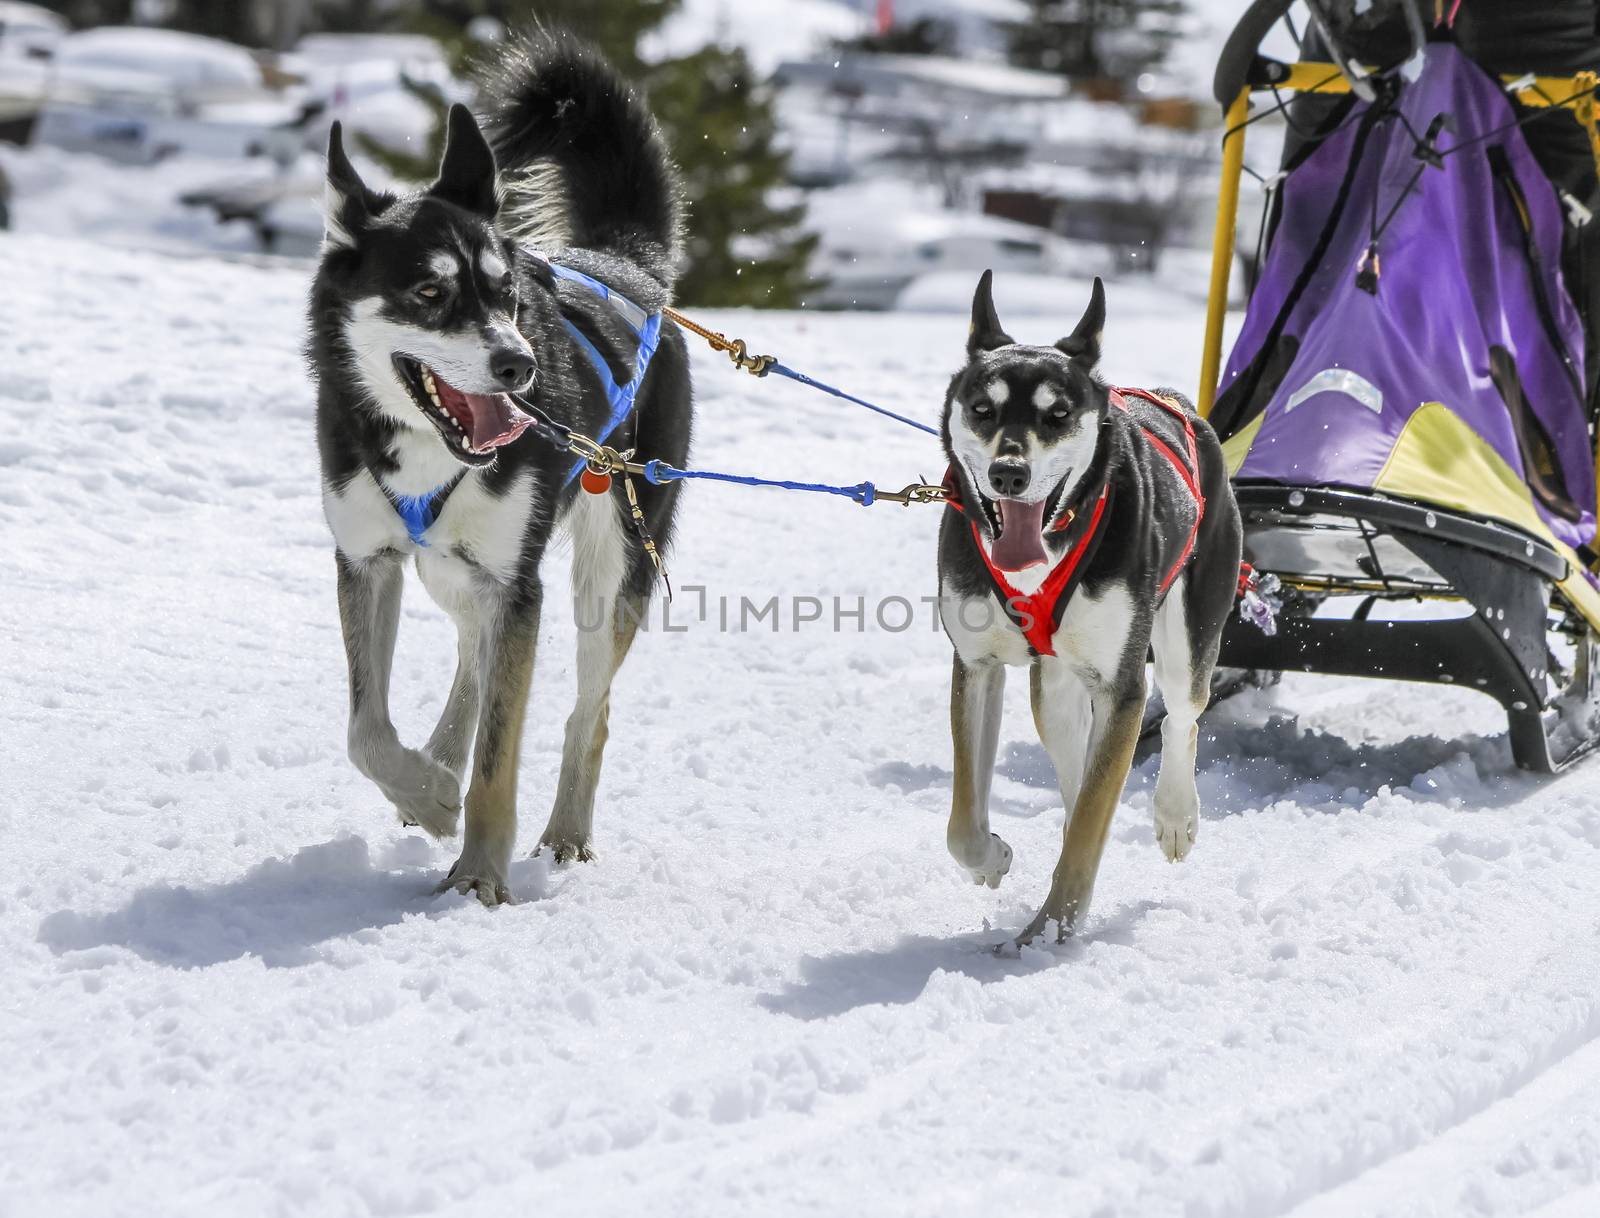 Sled dogs in speed racing, Moss, Switzerland by Elenaphotos21